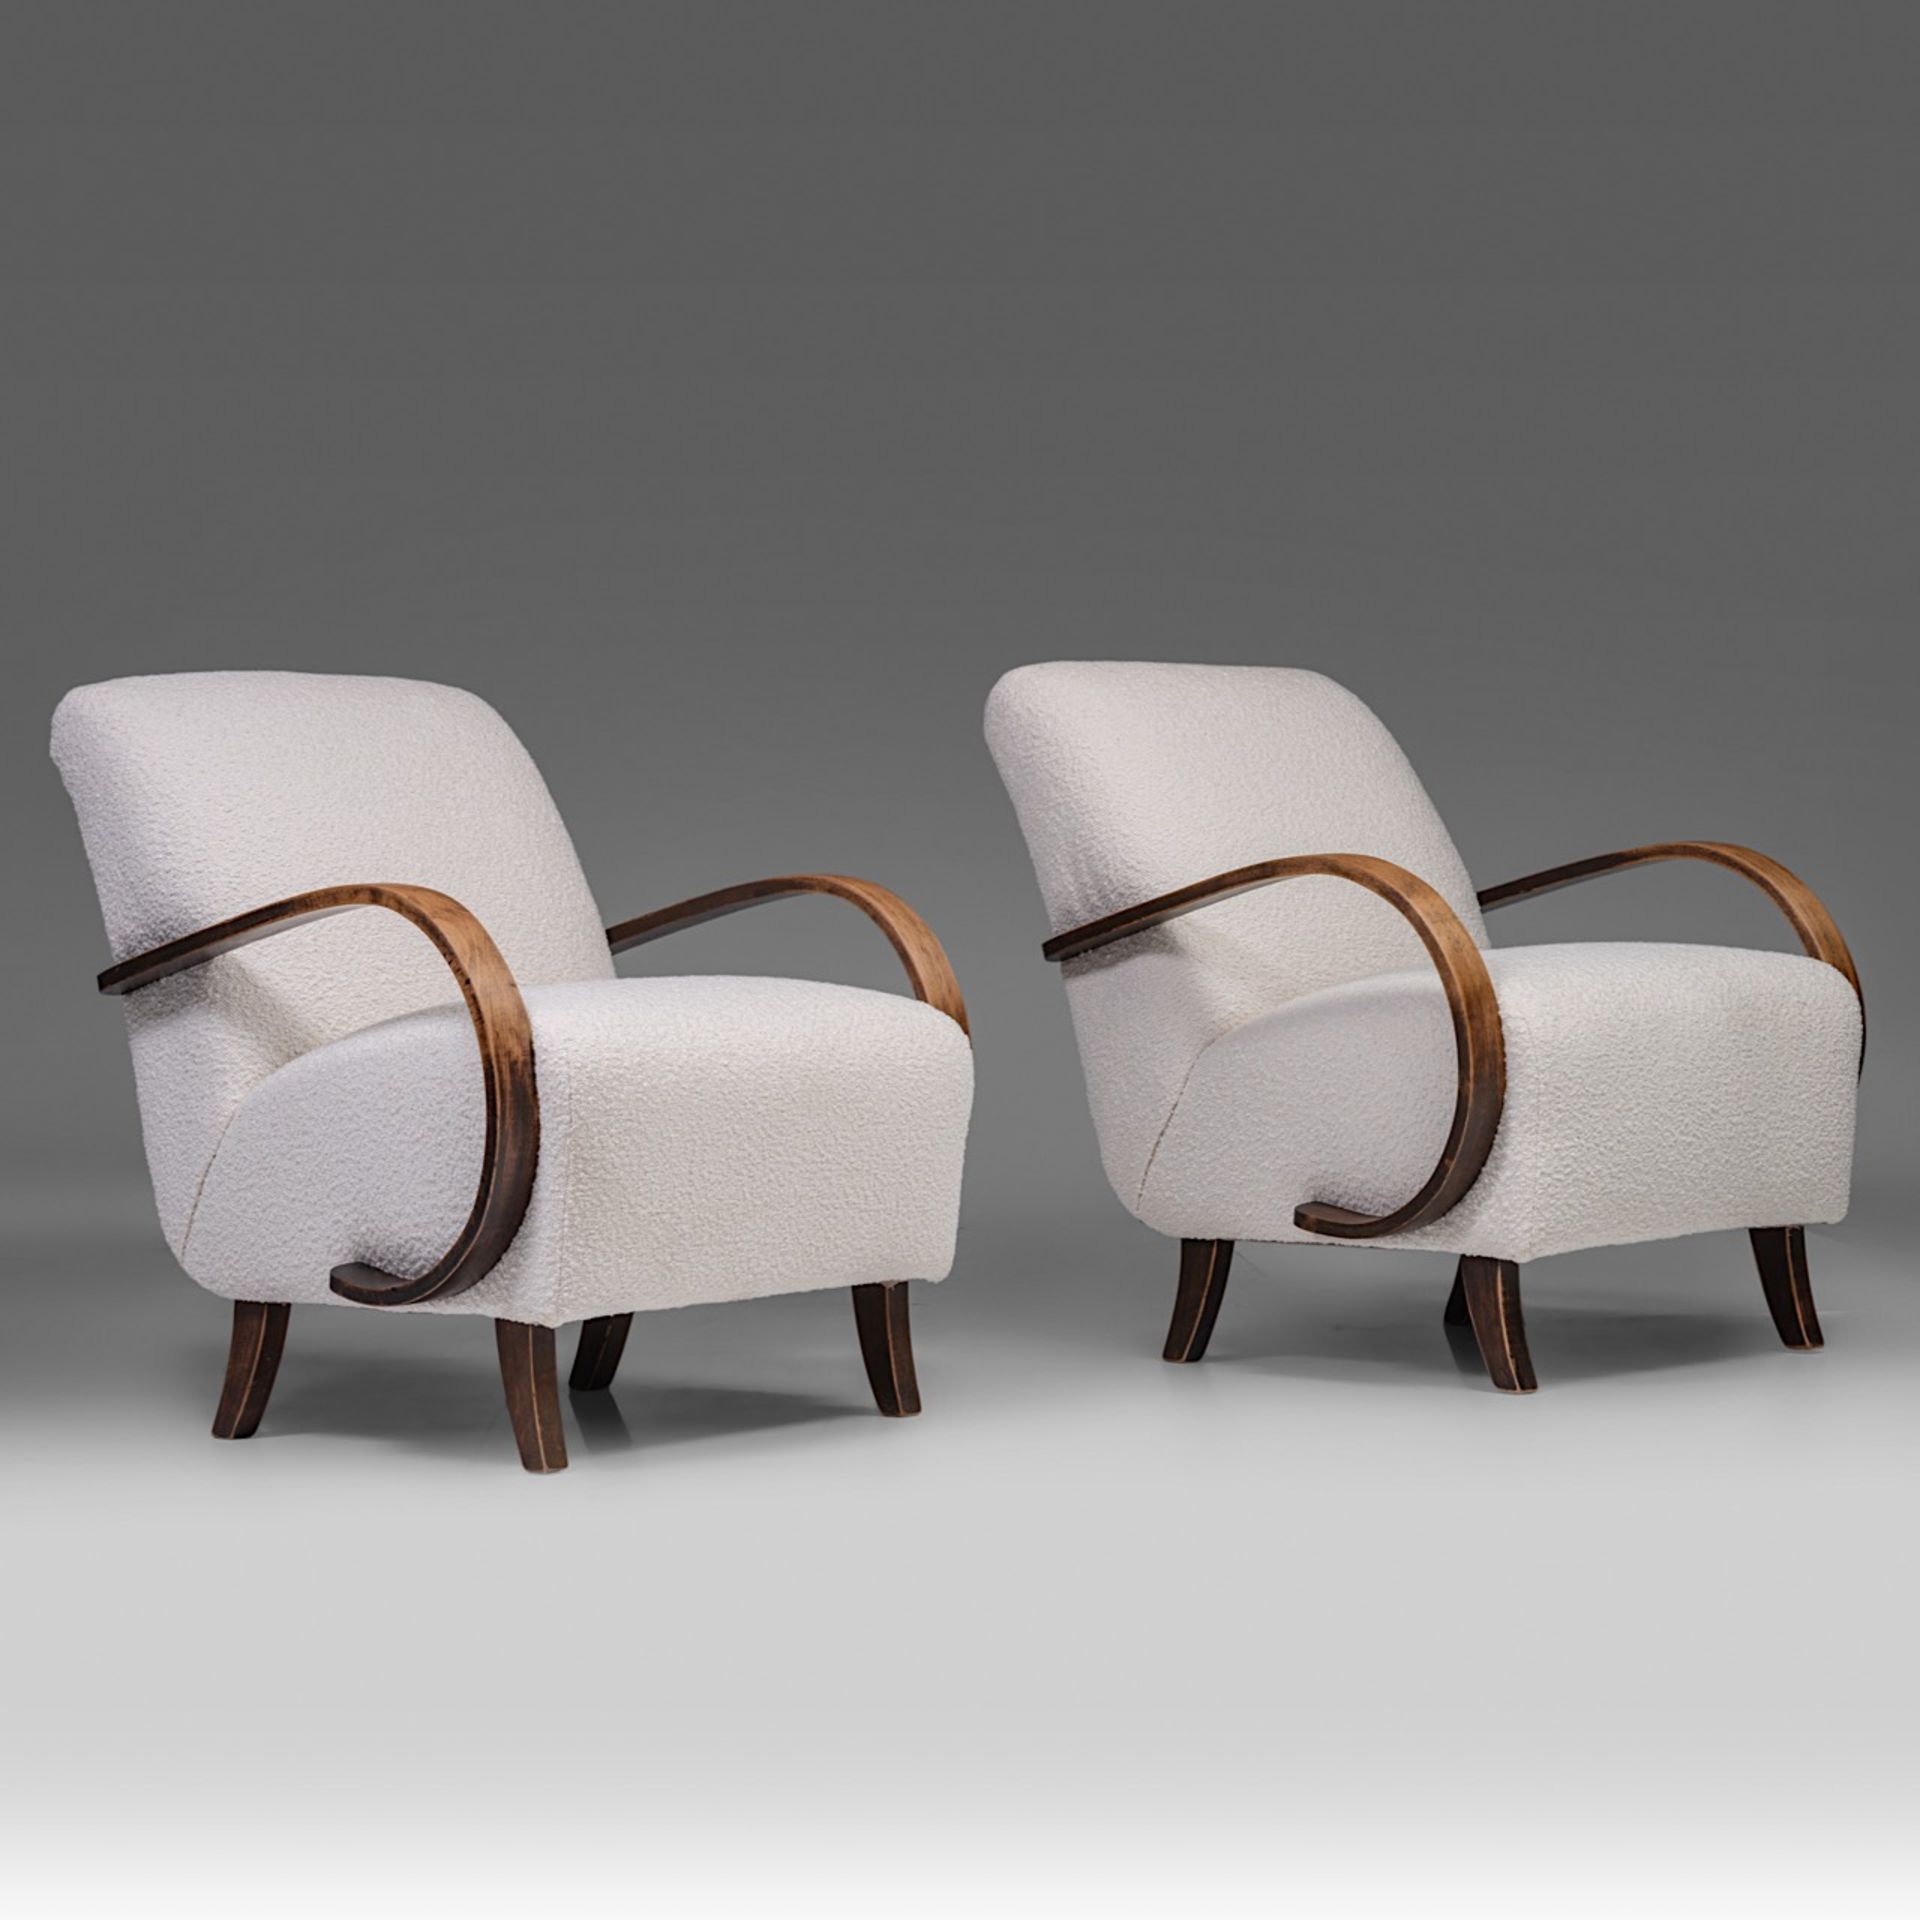 A pair of Mid-century Armchairs by Jindrich Halabala, 1950s 83 x 68 x 87 cm. (32.6 x 26.7 x 34 1/4 i - Image 13 of 13